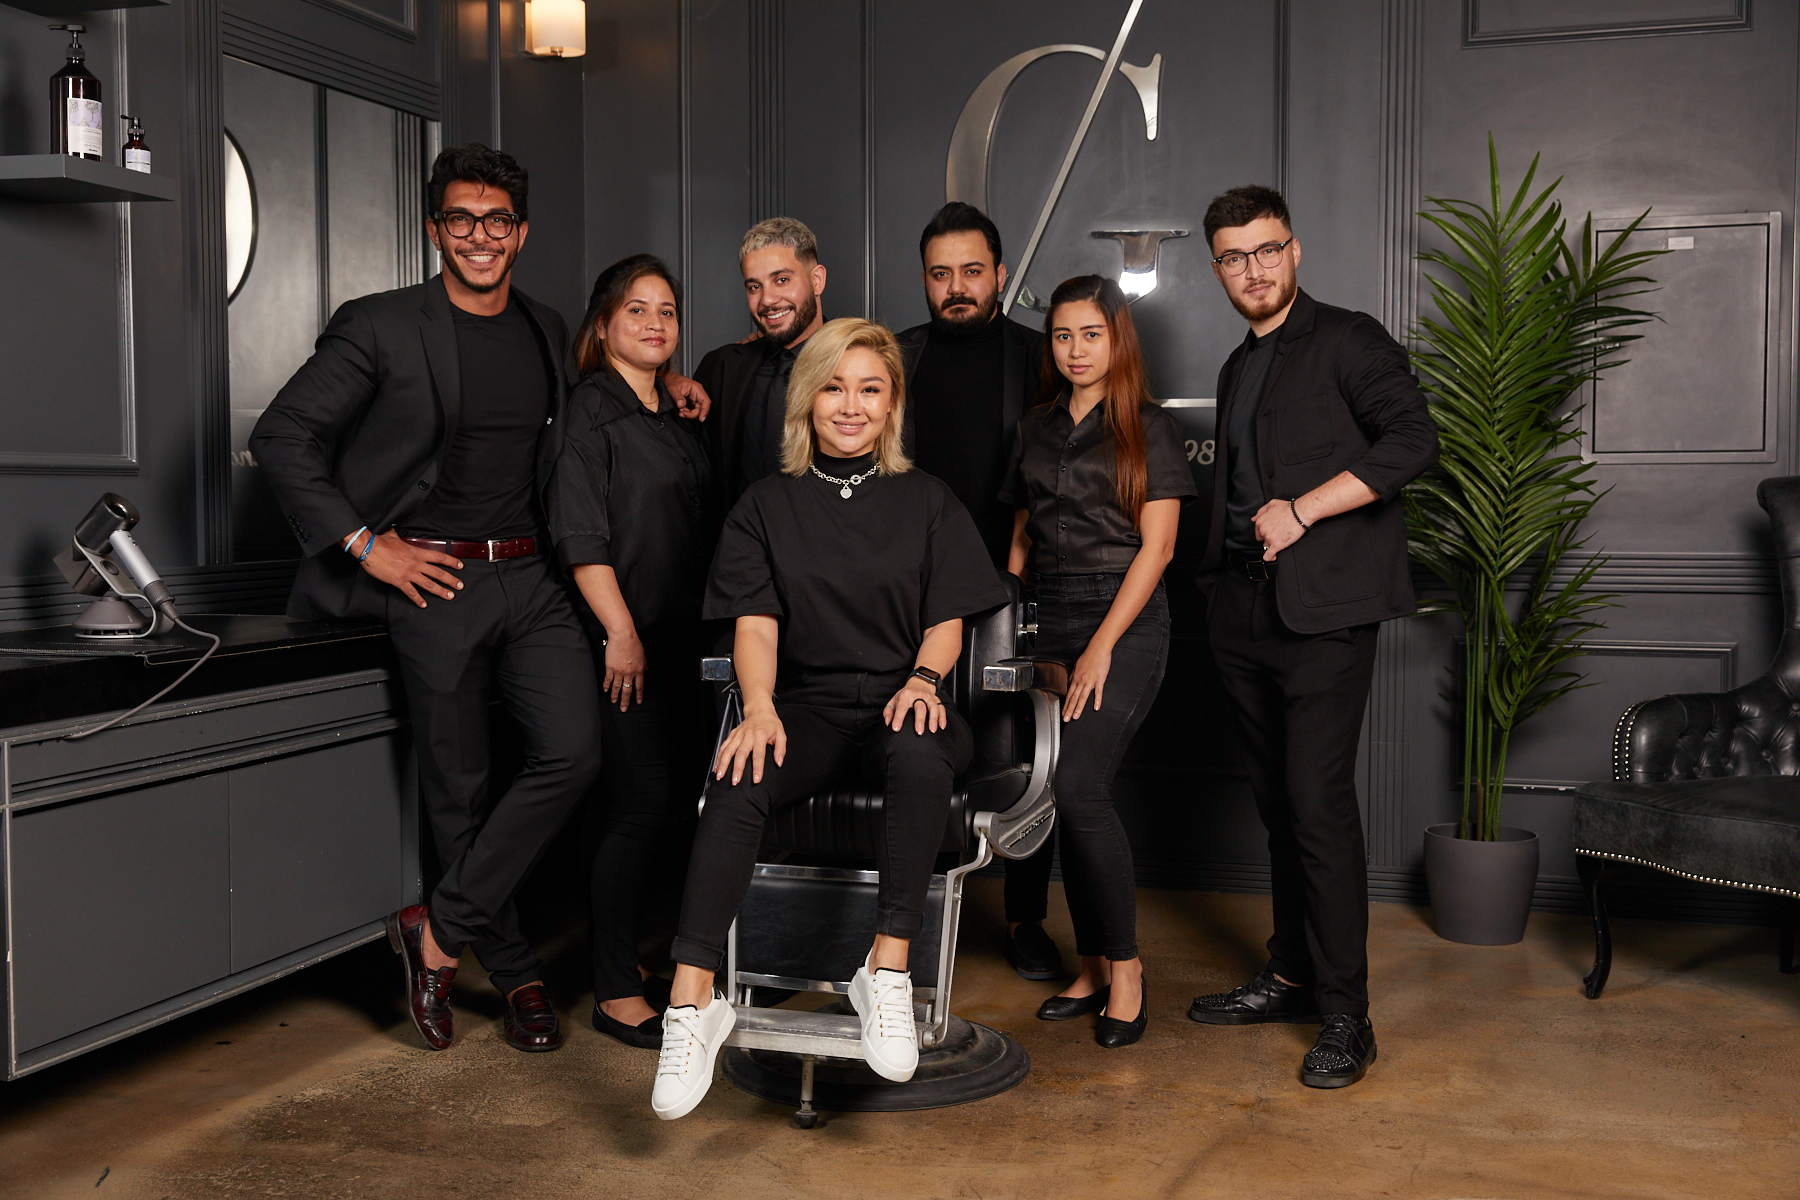 Our Team | CG Barbershop is Expansion